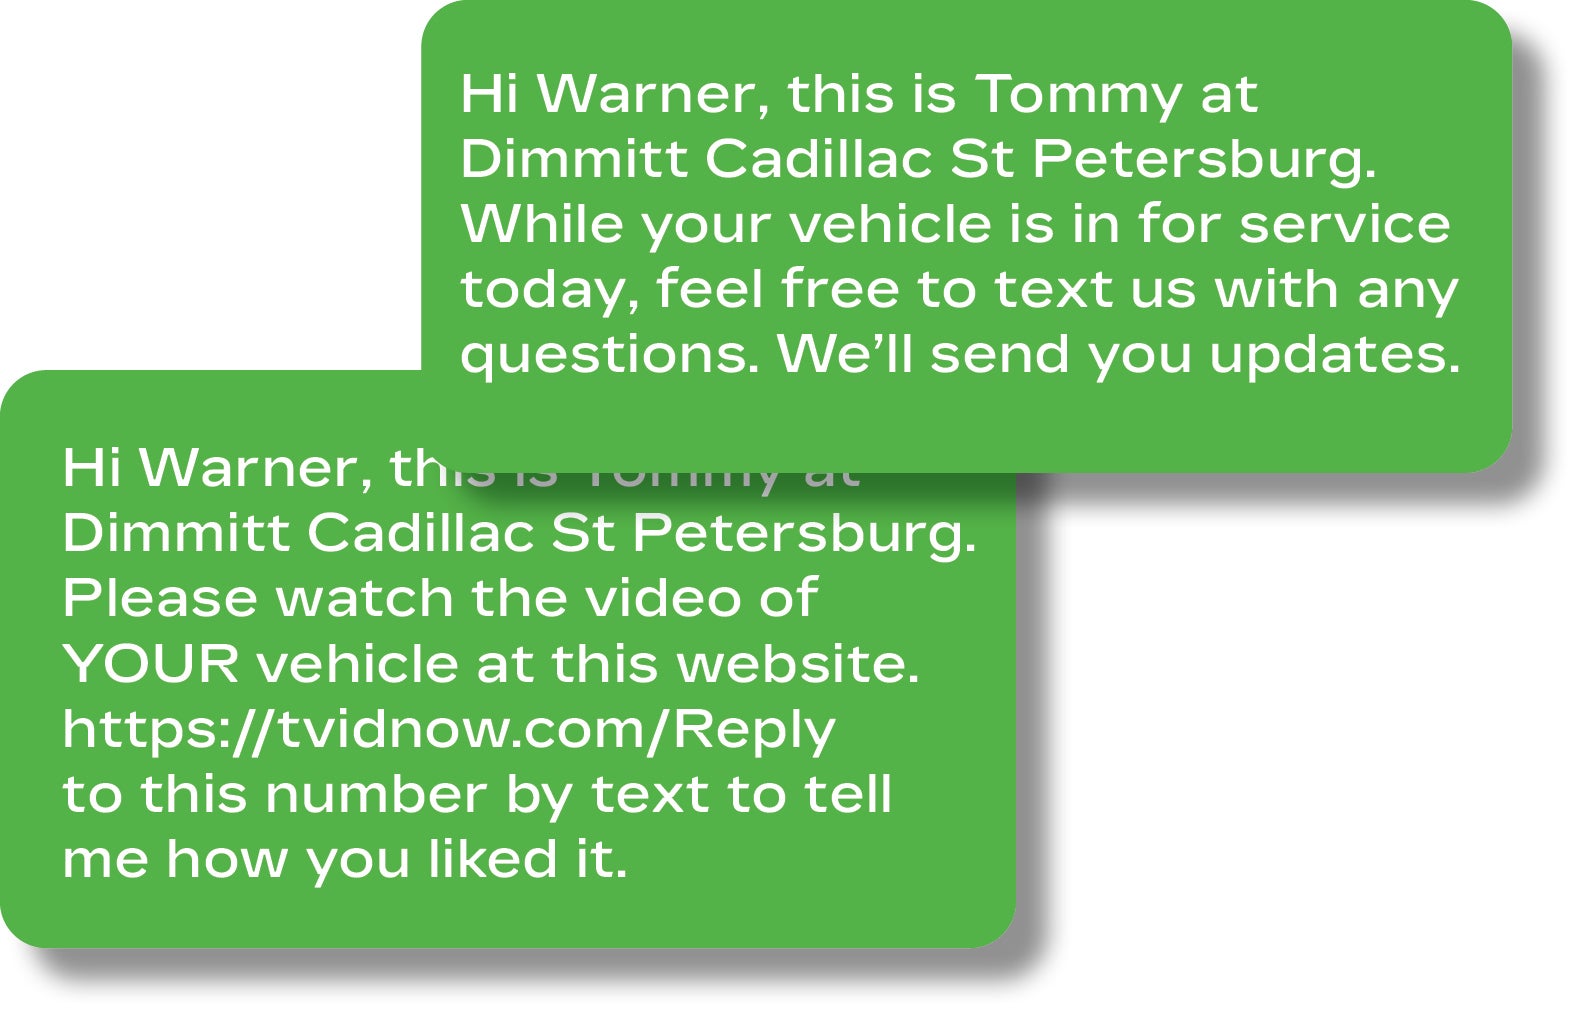 sms text about Dimmitt Cadillac St Petersburg and thier new video service